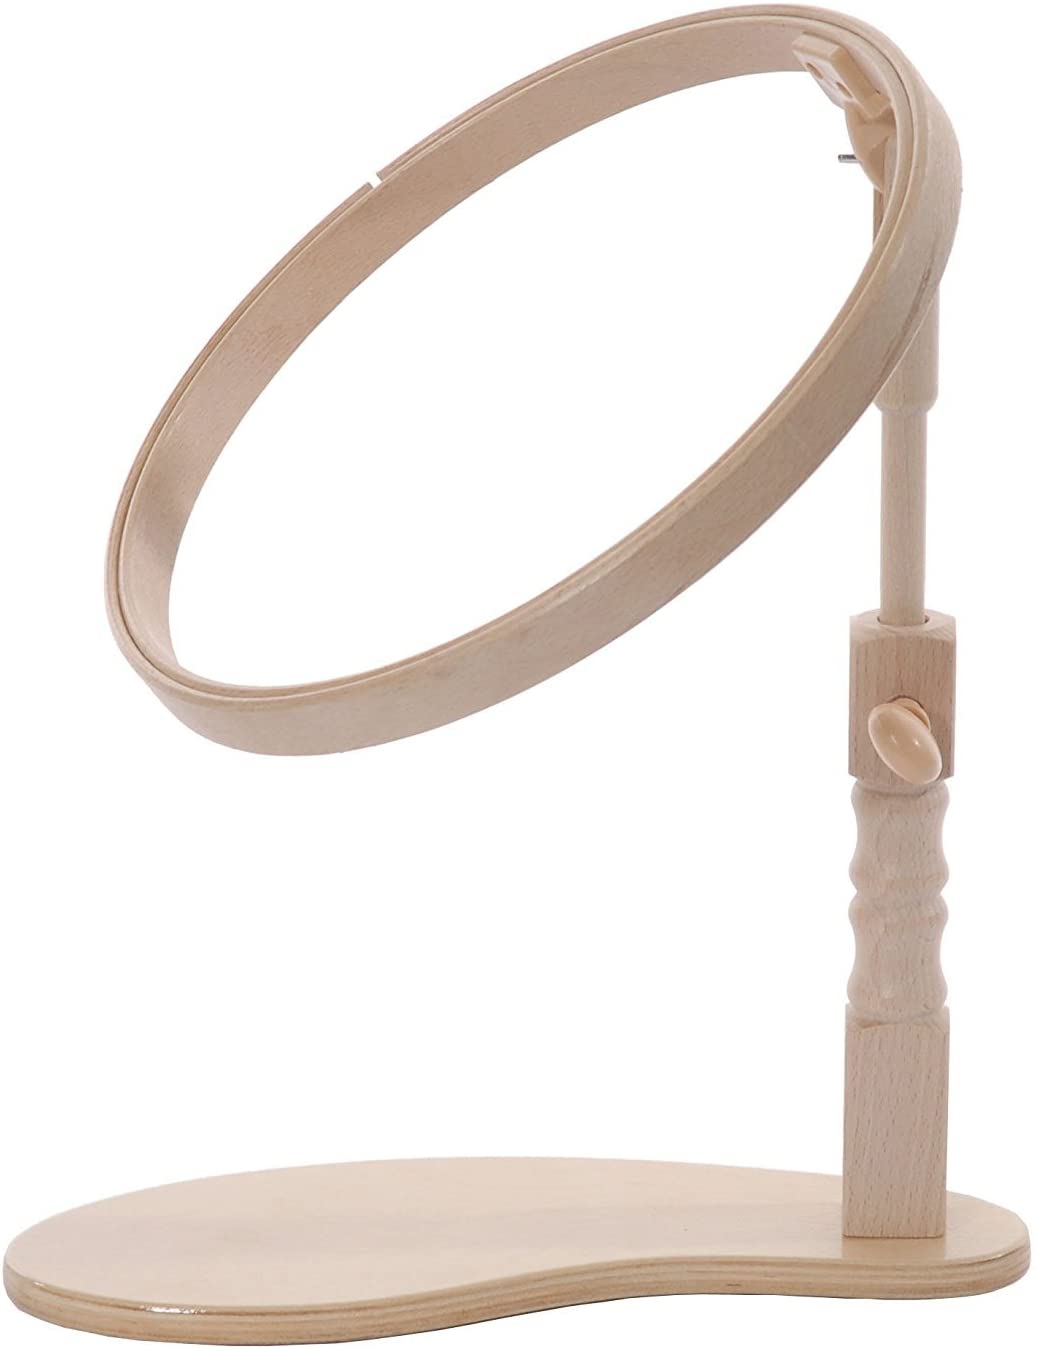 SEAT6 Seat Frame wooden base with 15cm  - 6" x  1"  hoop by Elbesee